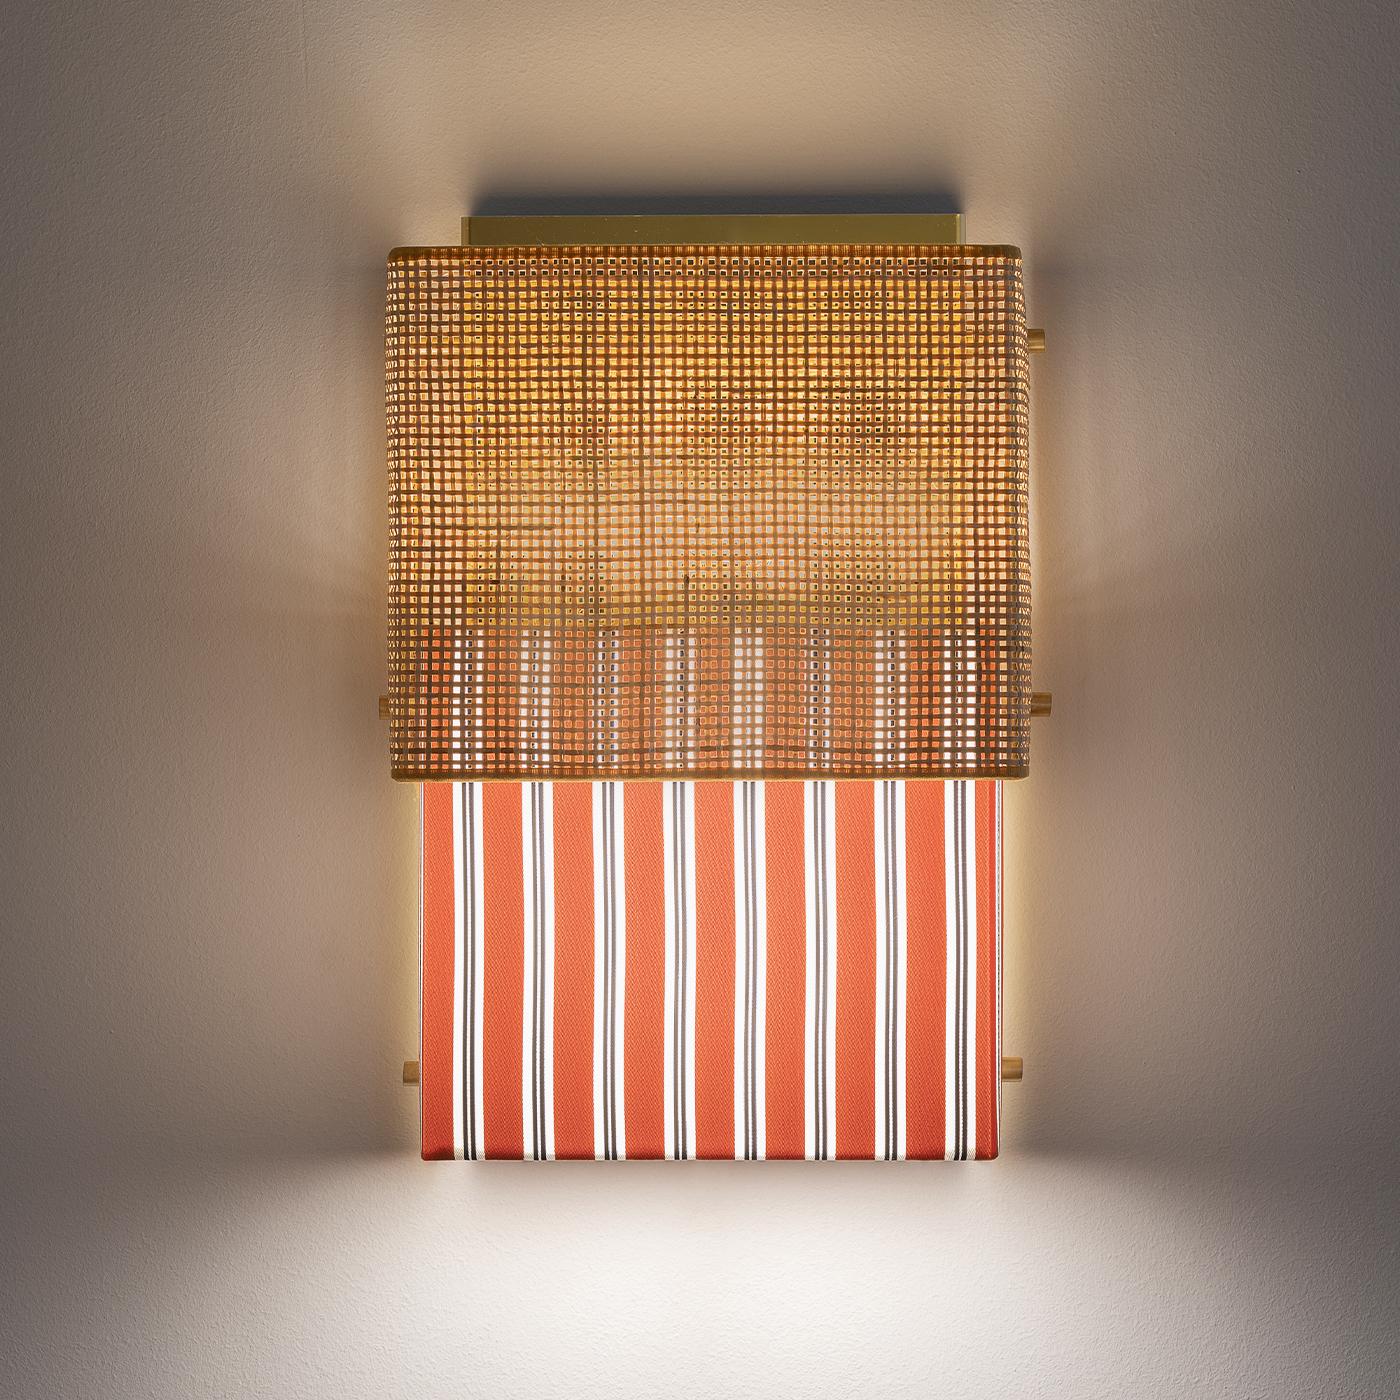 One of the most iconic designs of the 20th century is the bikini; this famous style inspired this mounted wall lamp made from two pieces of fabric. An upper part in rattan sits above rust-colored, striped Trevira fabric from the Milan-based textiles